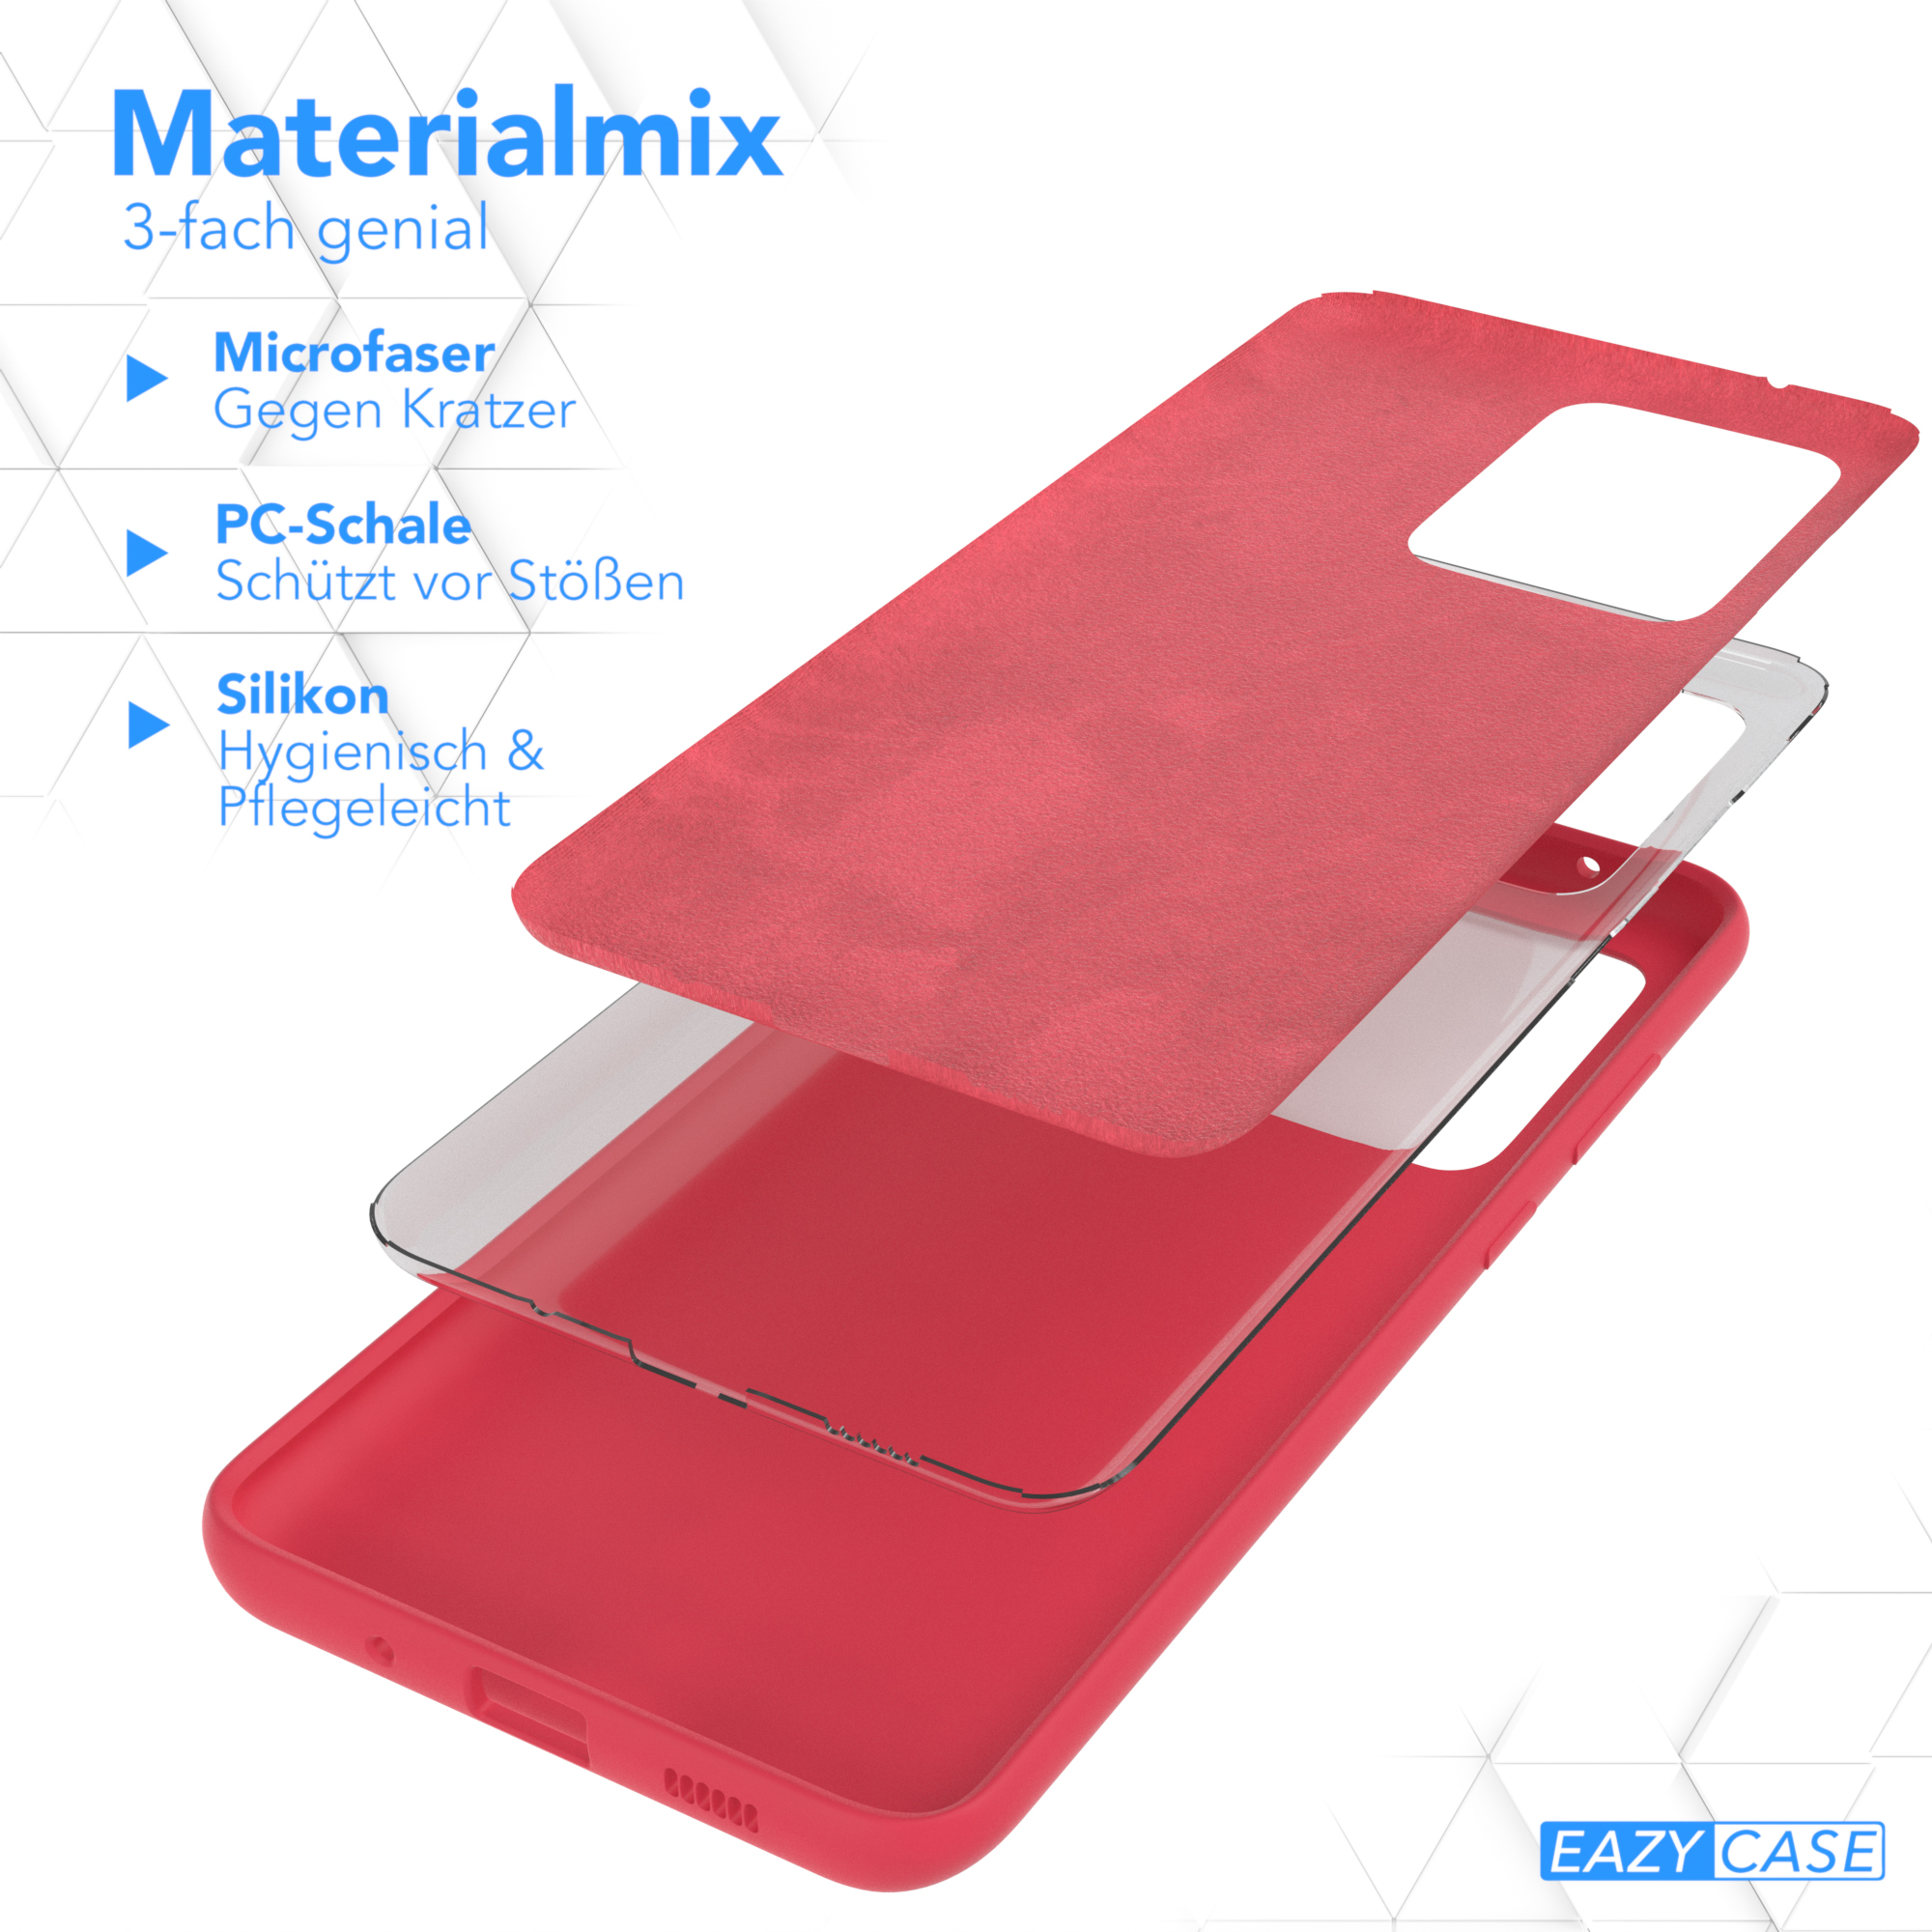 EAZY CASE Premium / Galaxy Backcover, S20 Ultra Samsung, 5G, Rot S20 Silikon / Beere Handycase, Ultra